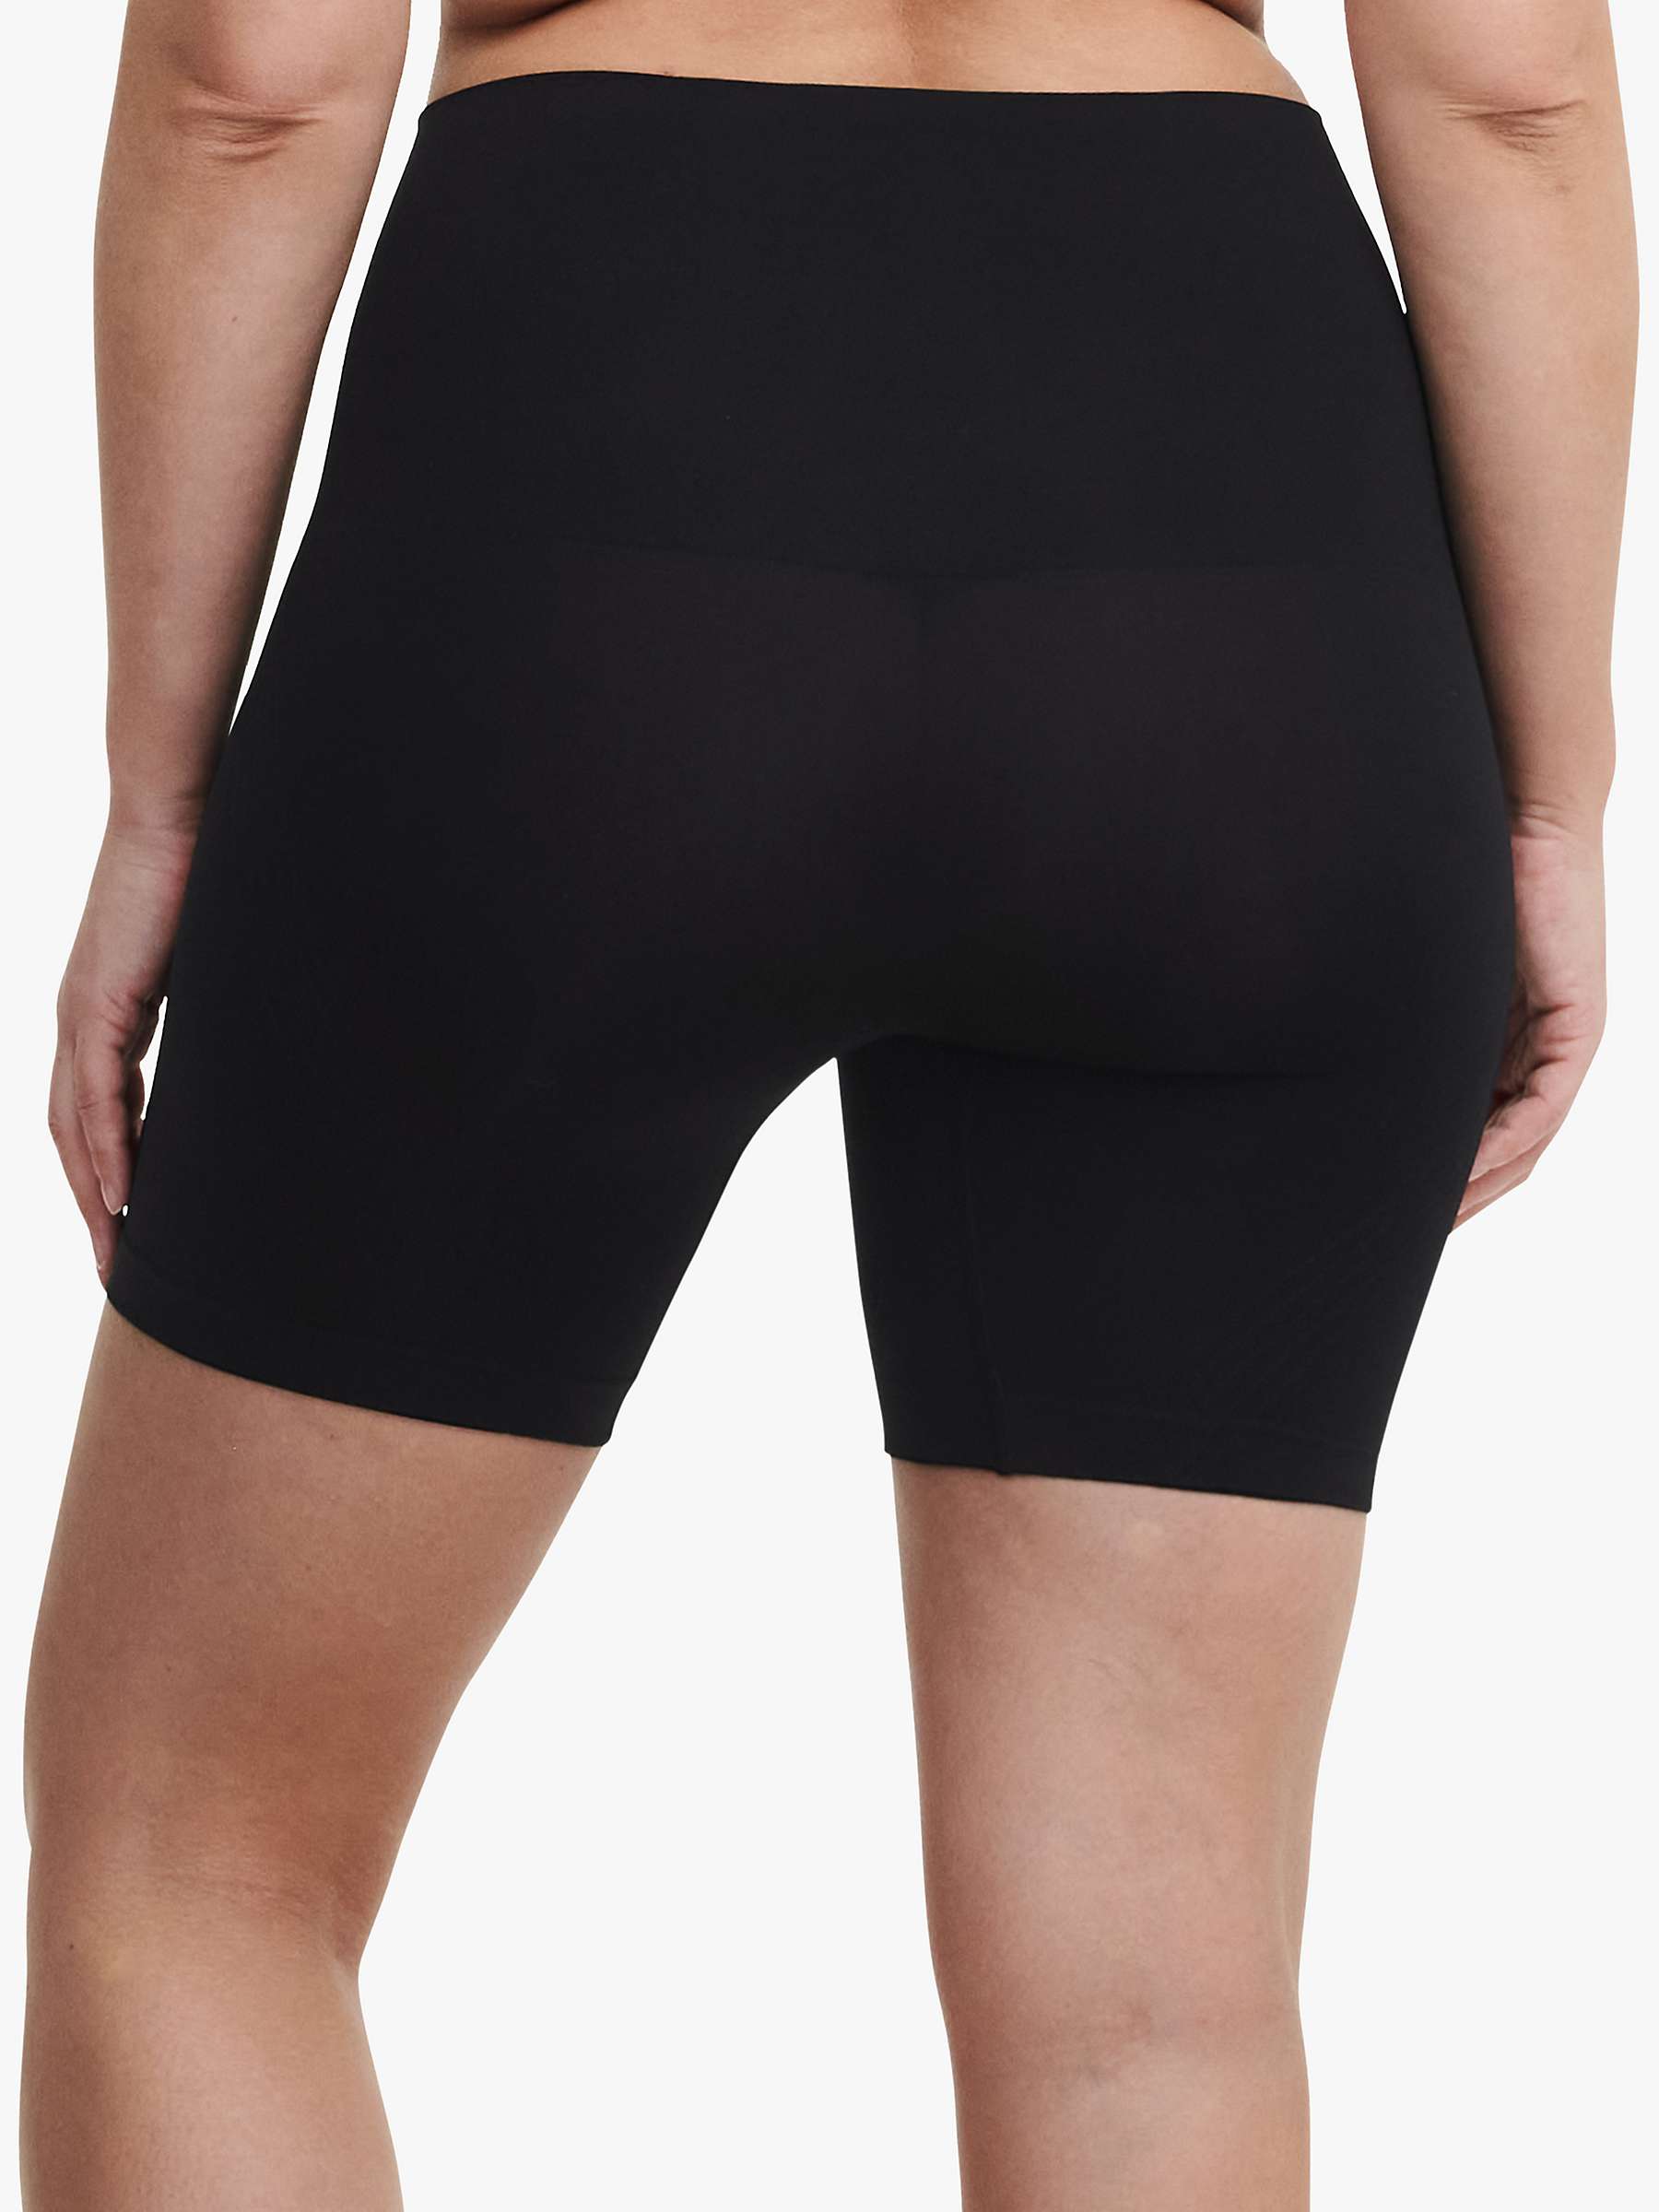 Buy Chantelle Smooth Comfort Light Shaping High Waisted Shorts Online at johnlewis.com